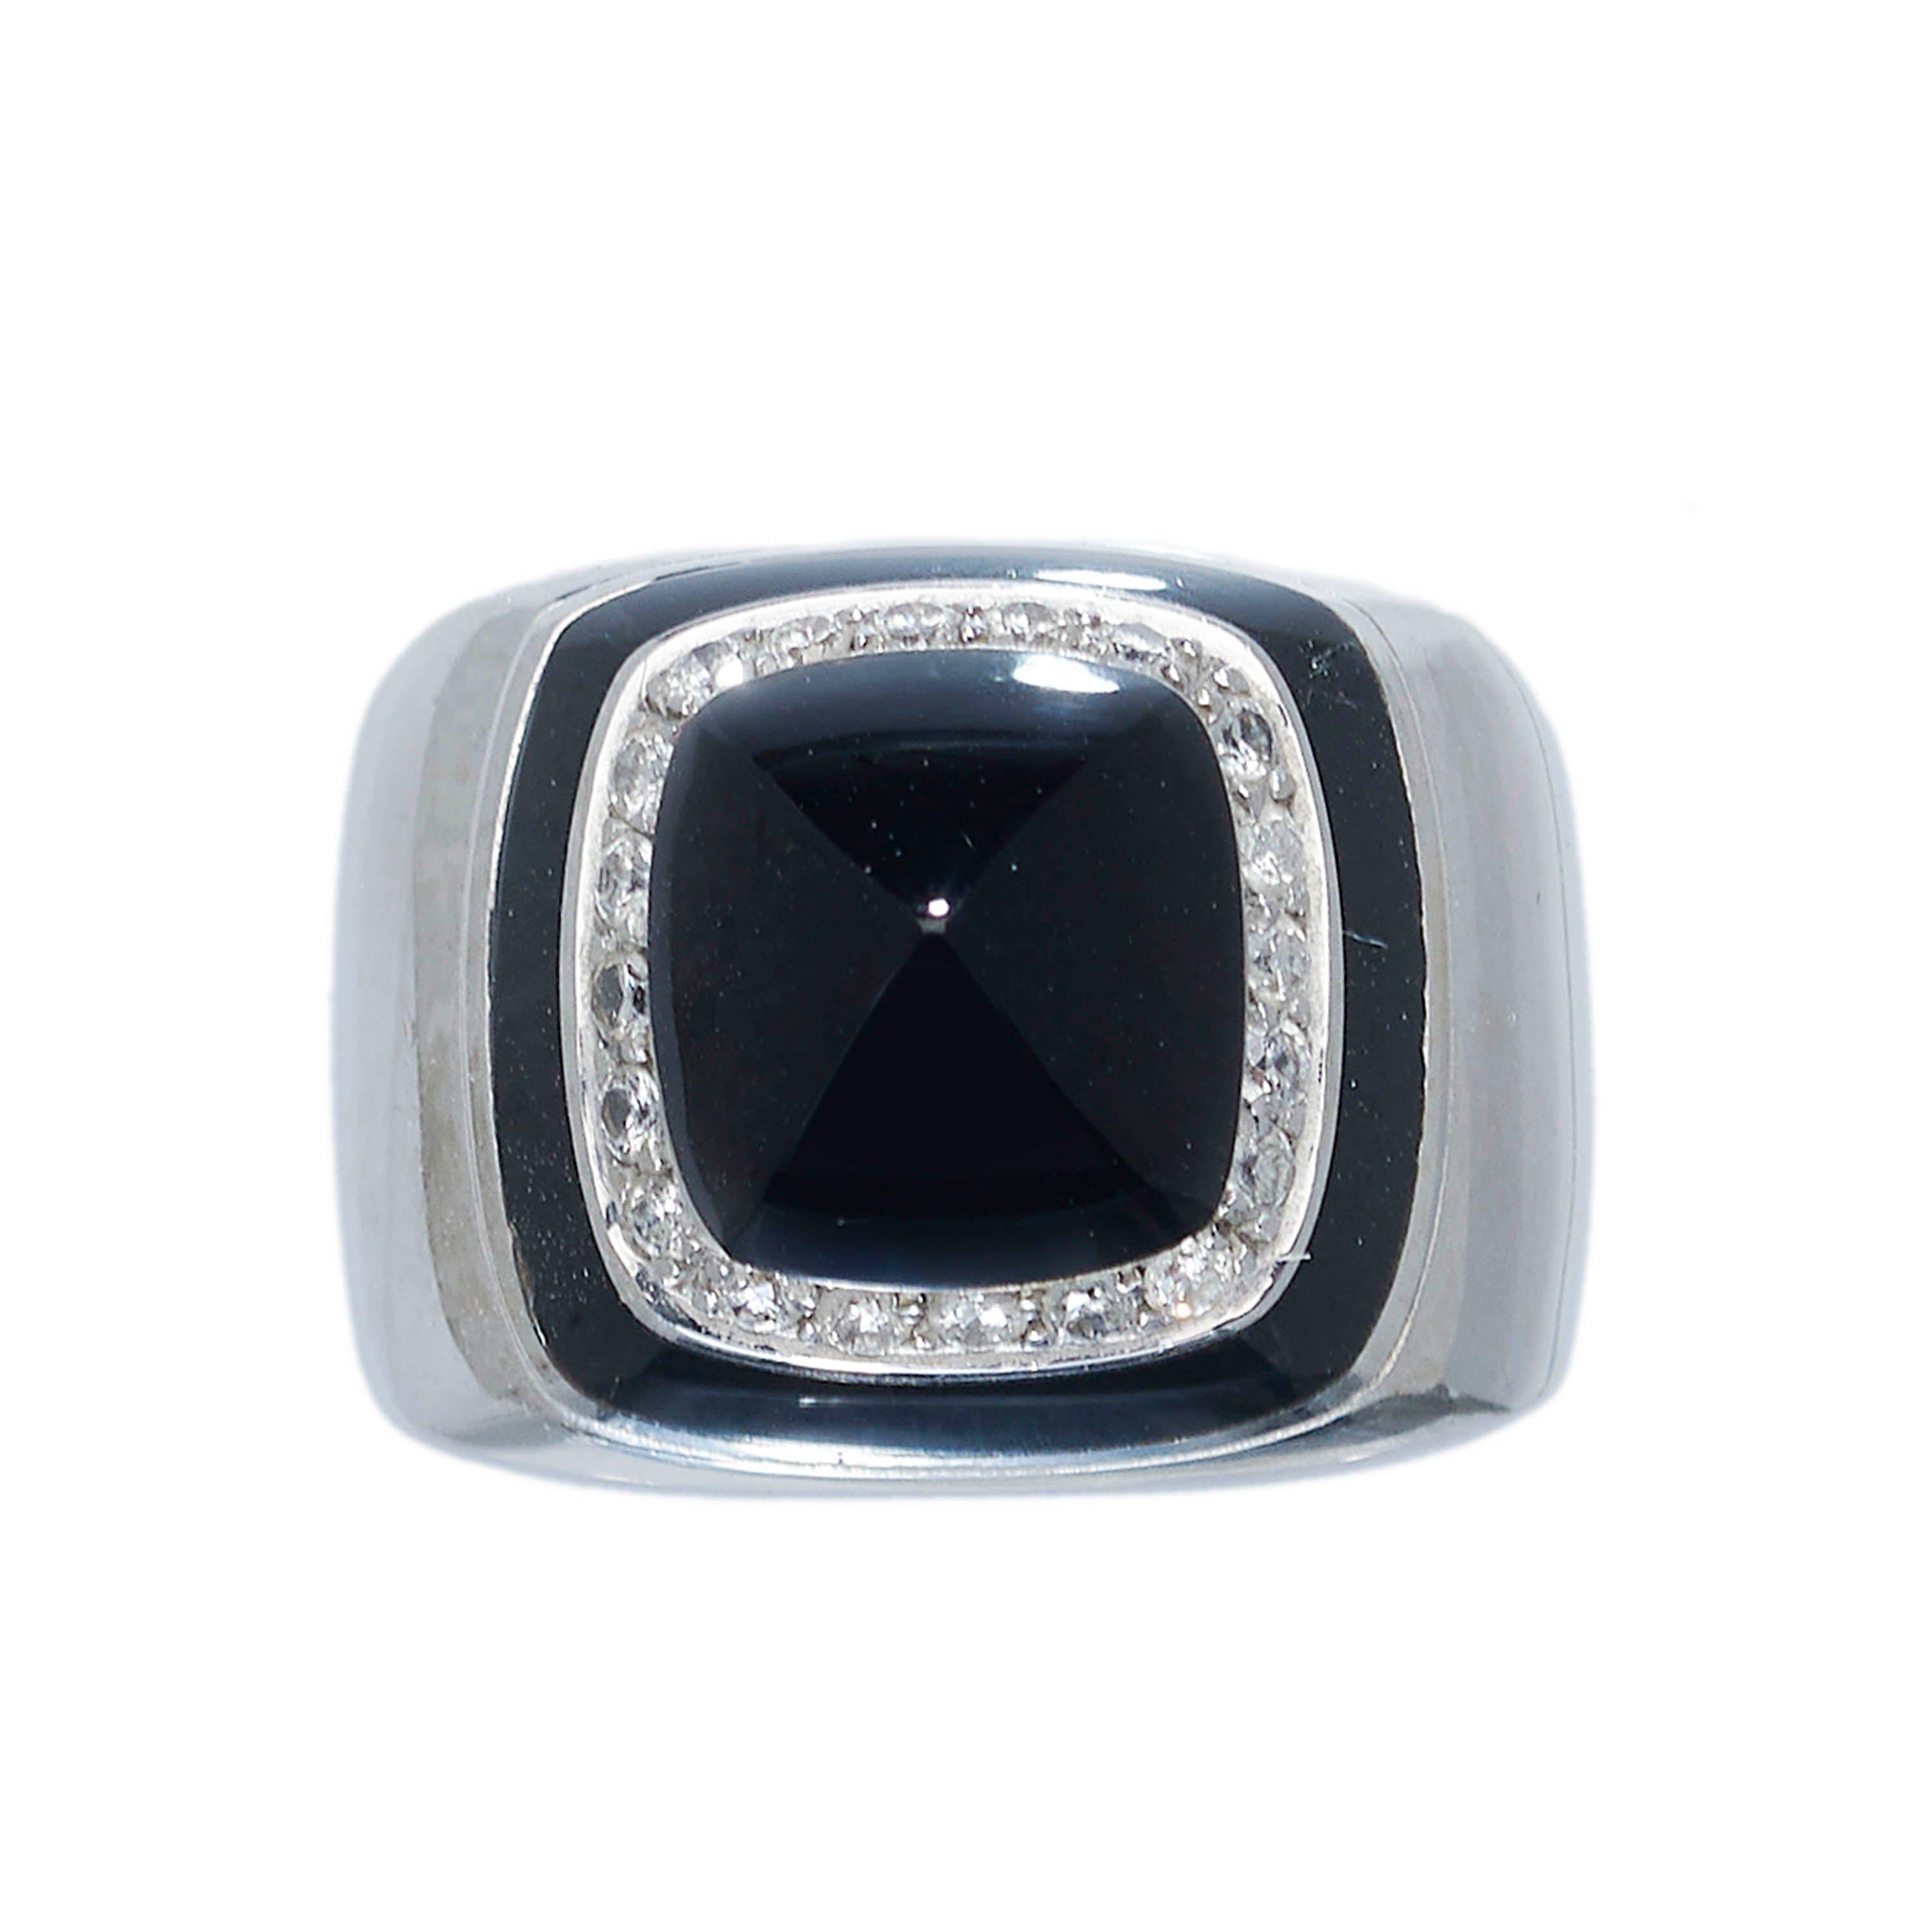 A vintage Italian black onyx and diamond dress ring, set with a square, sugar-loaf shaped, cabochon-cut black onyx, surrounded by a channel of round brilliant-cut diamonds, in grain settings, with a black onyx border, mounted in 18ct white gold with